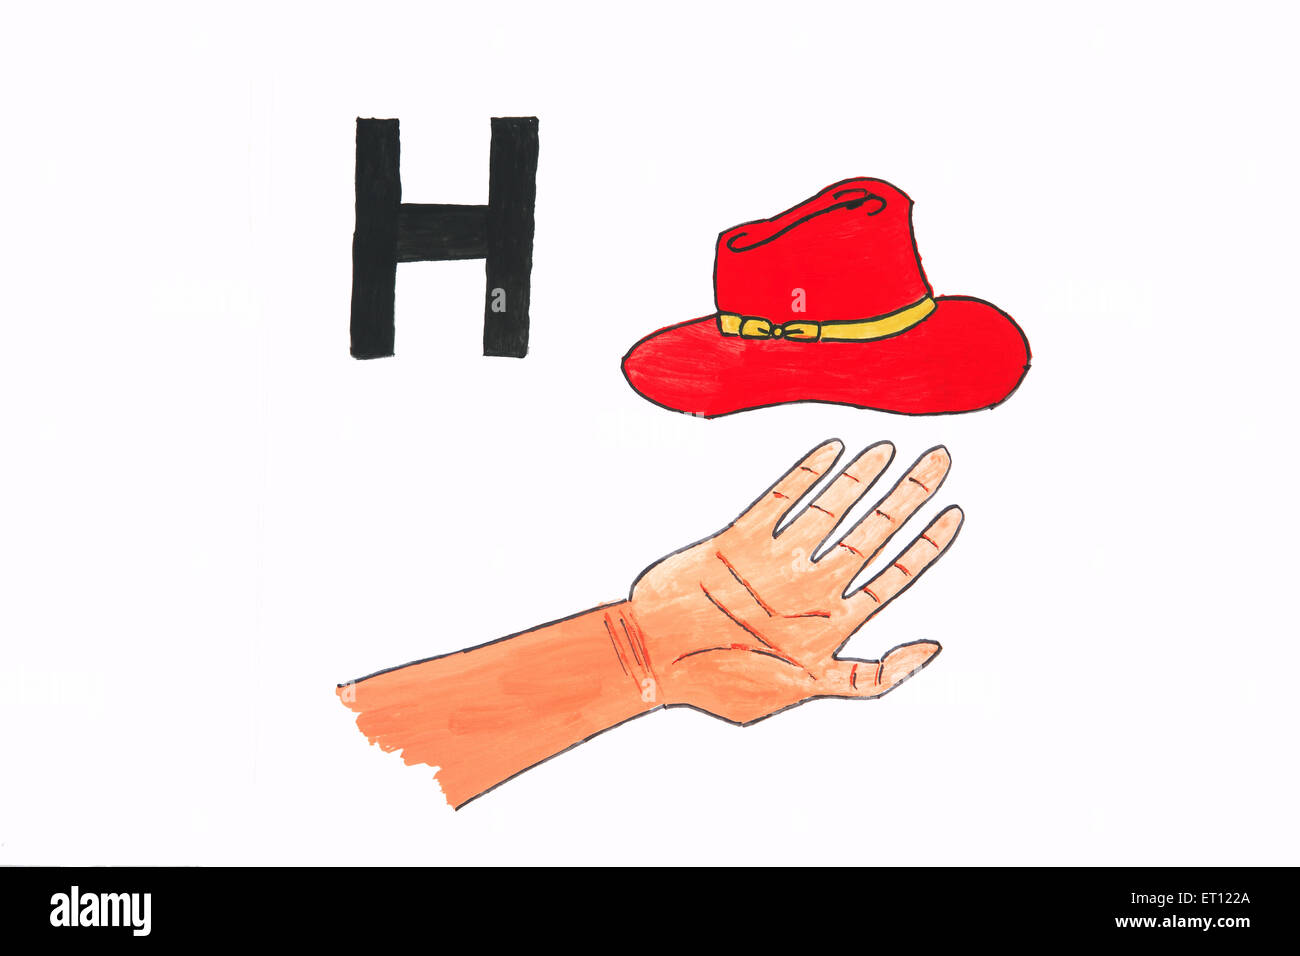 h for hand, h for hat Stock Photo